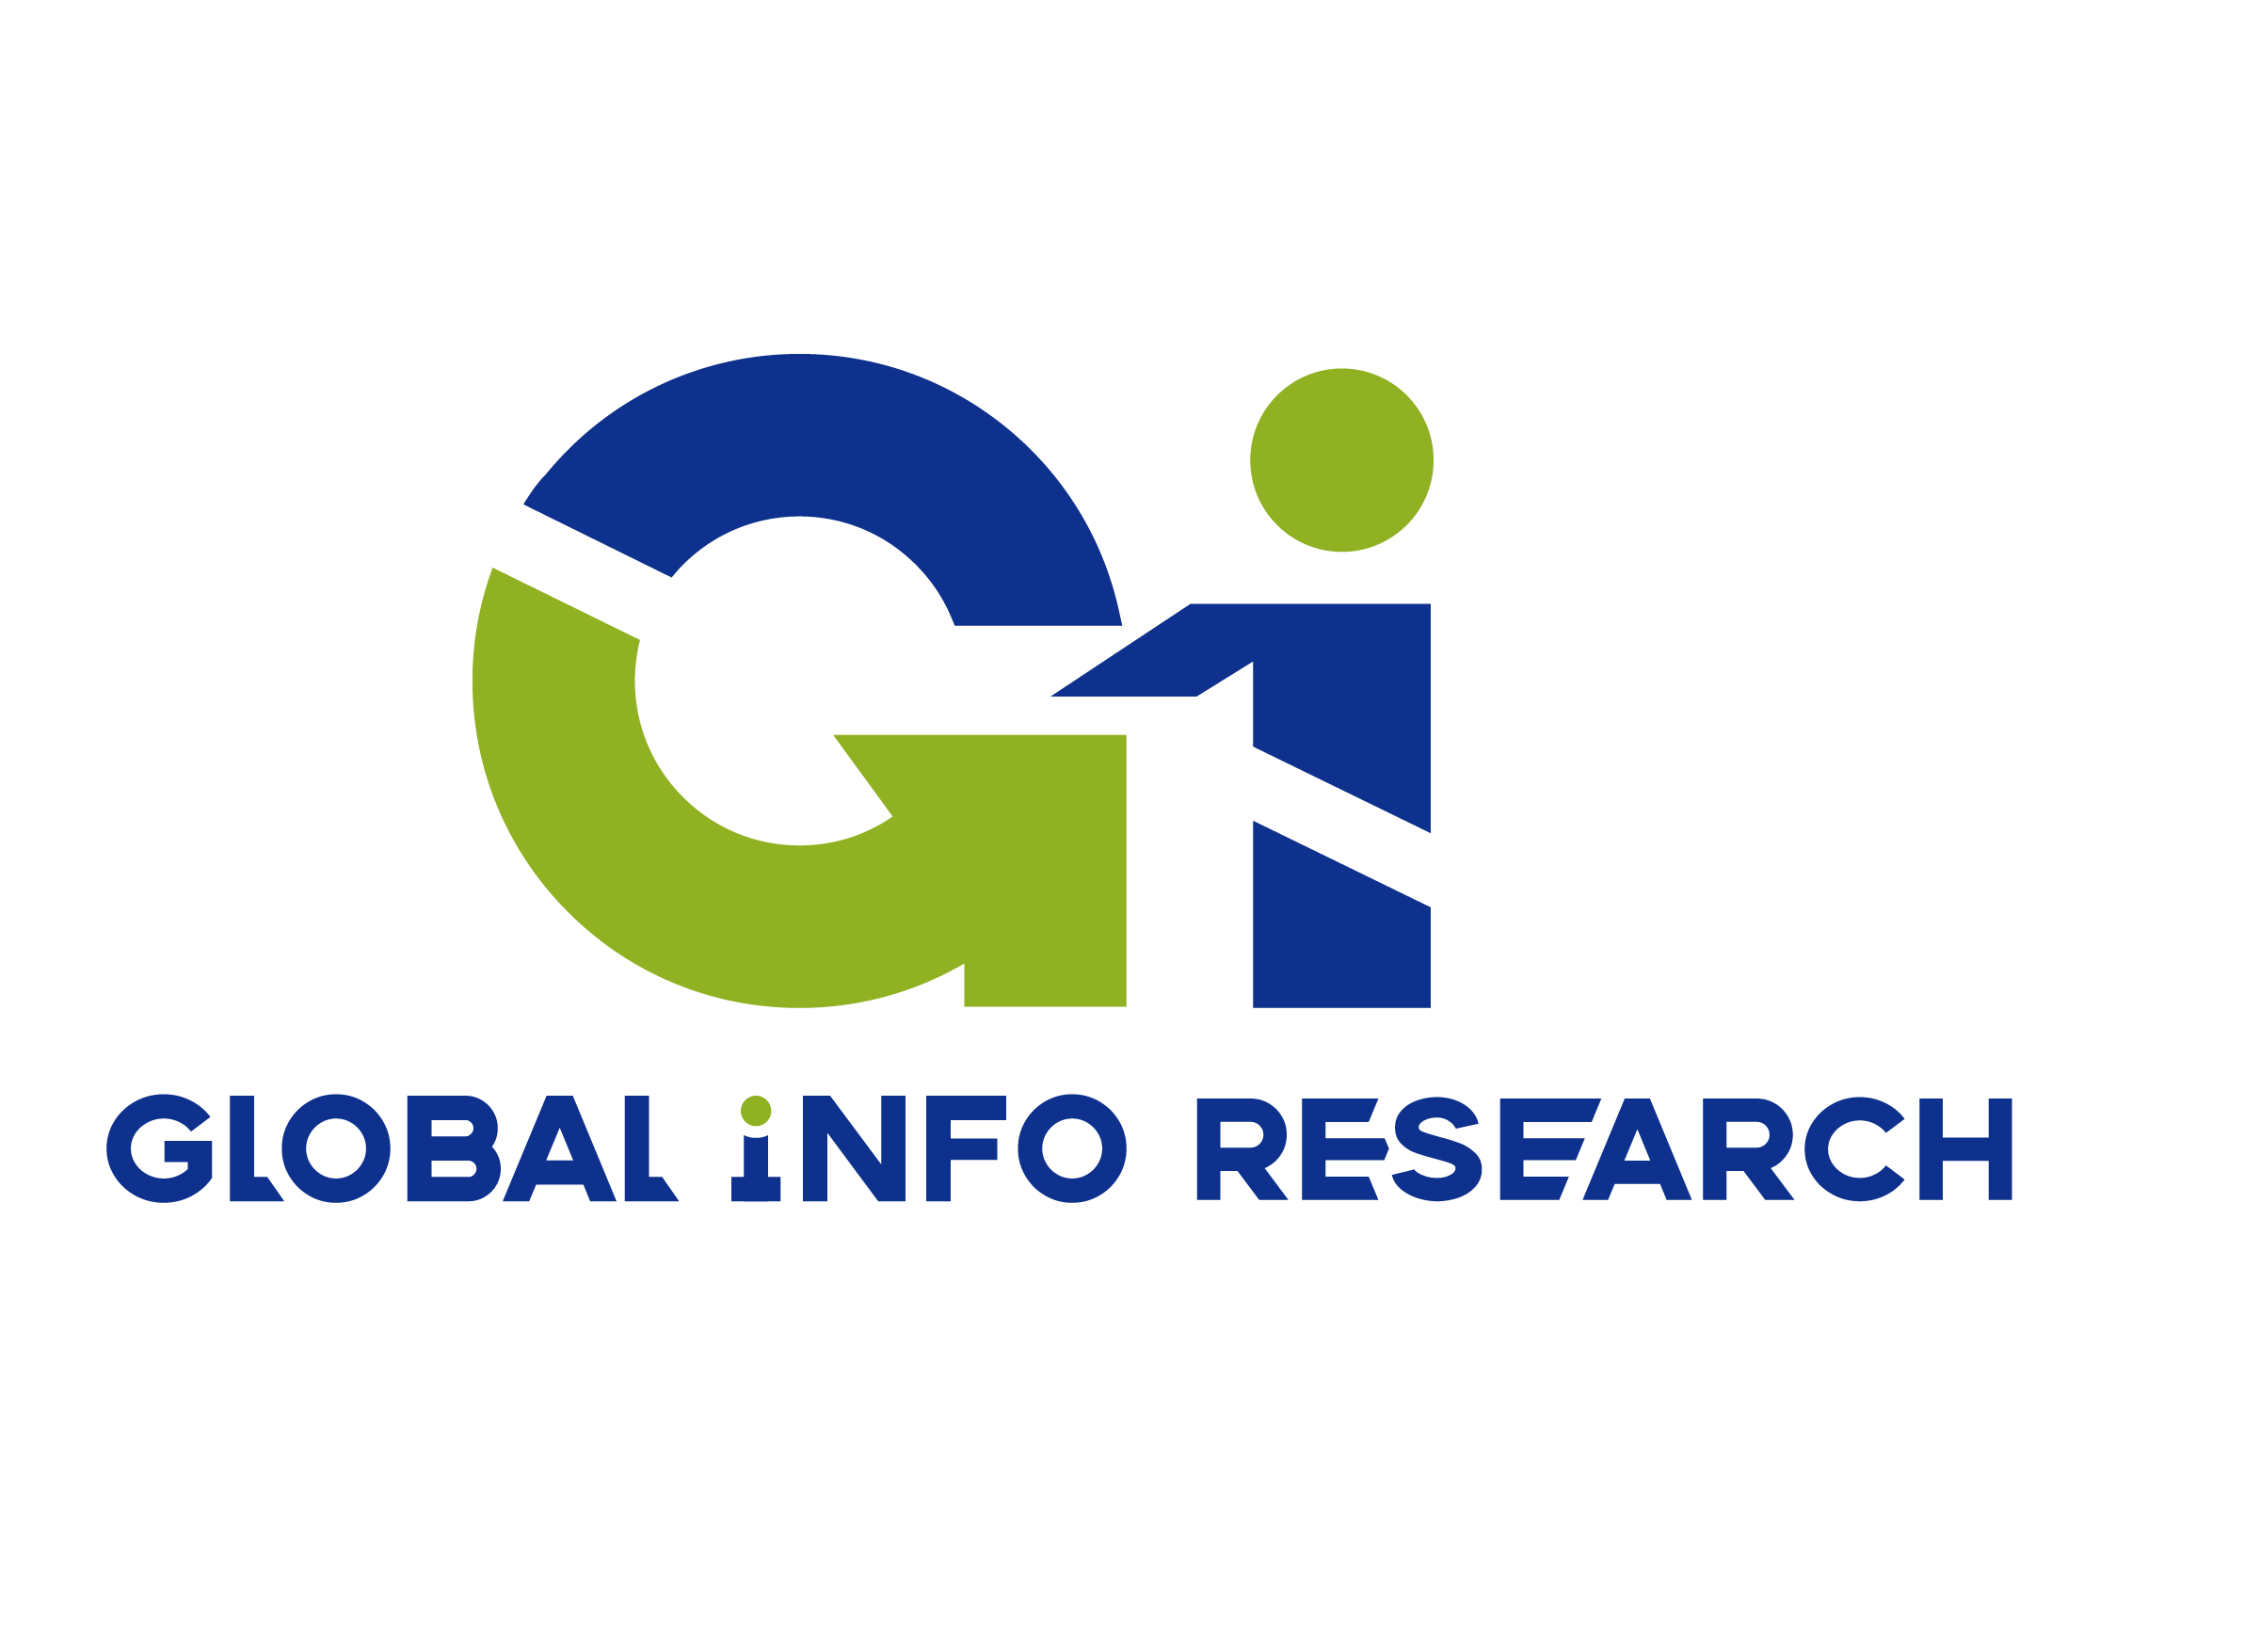 Global Info Research